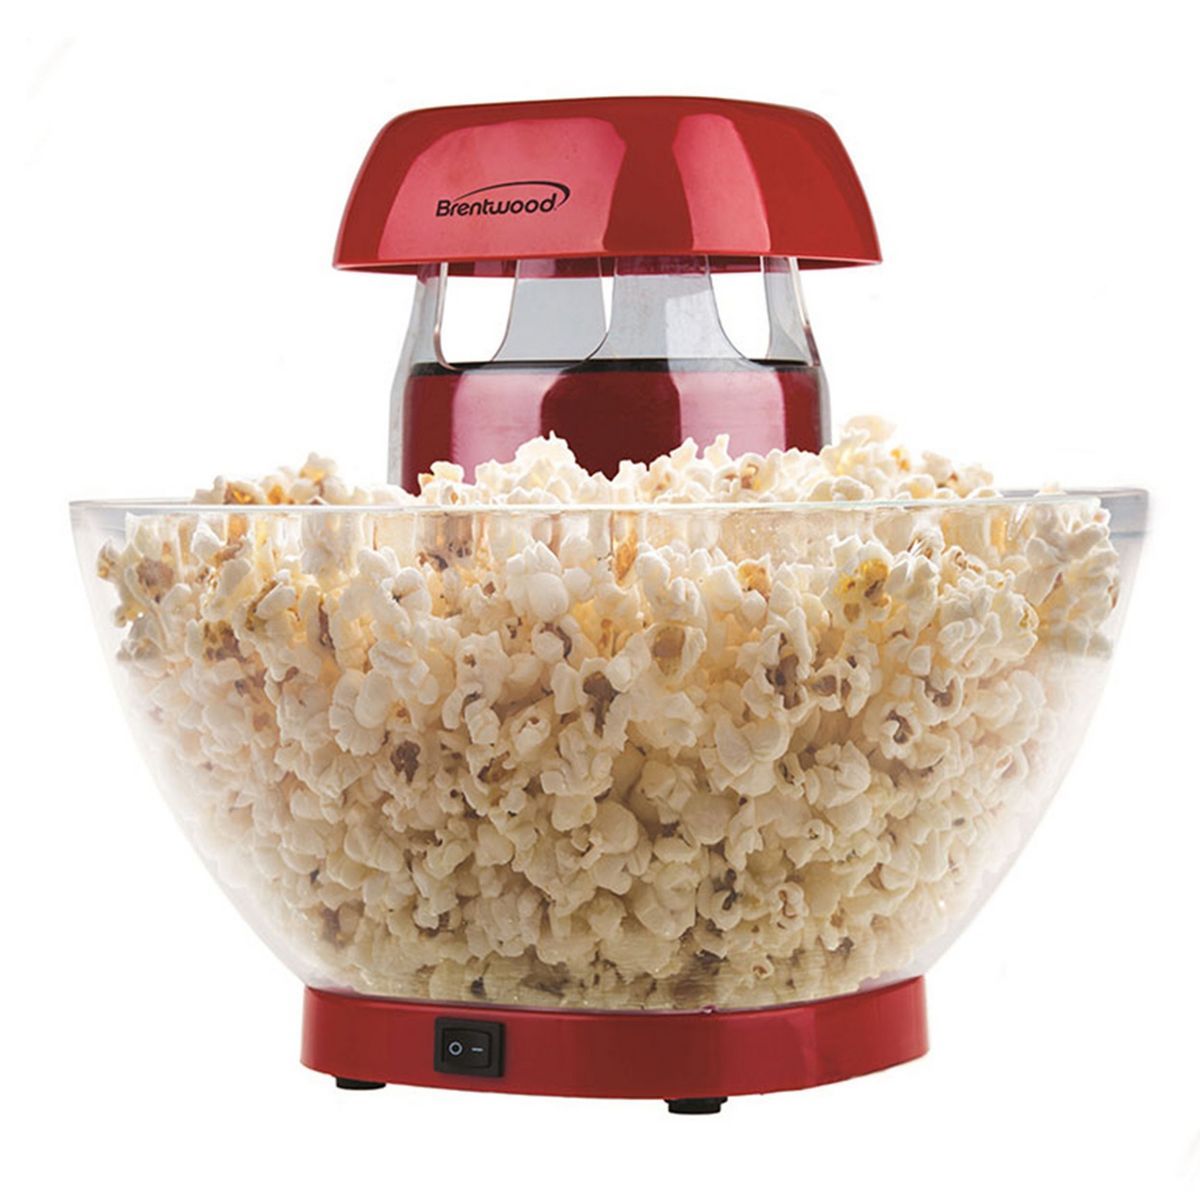 Brentwood Jumbo 24-Cup Hot Air Popcorn Maker in Red | Target